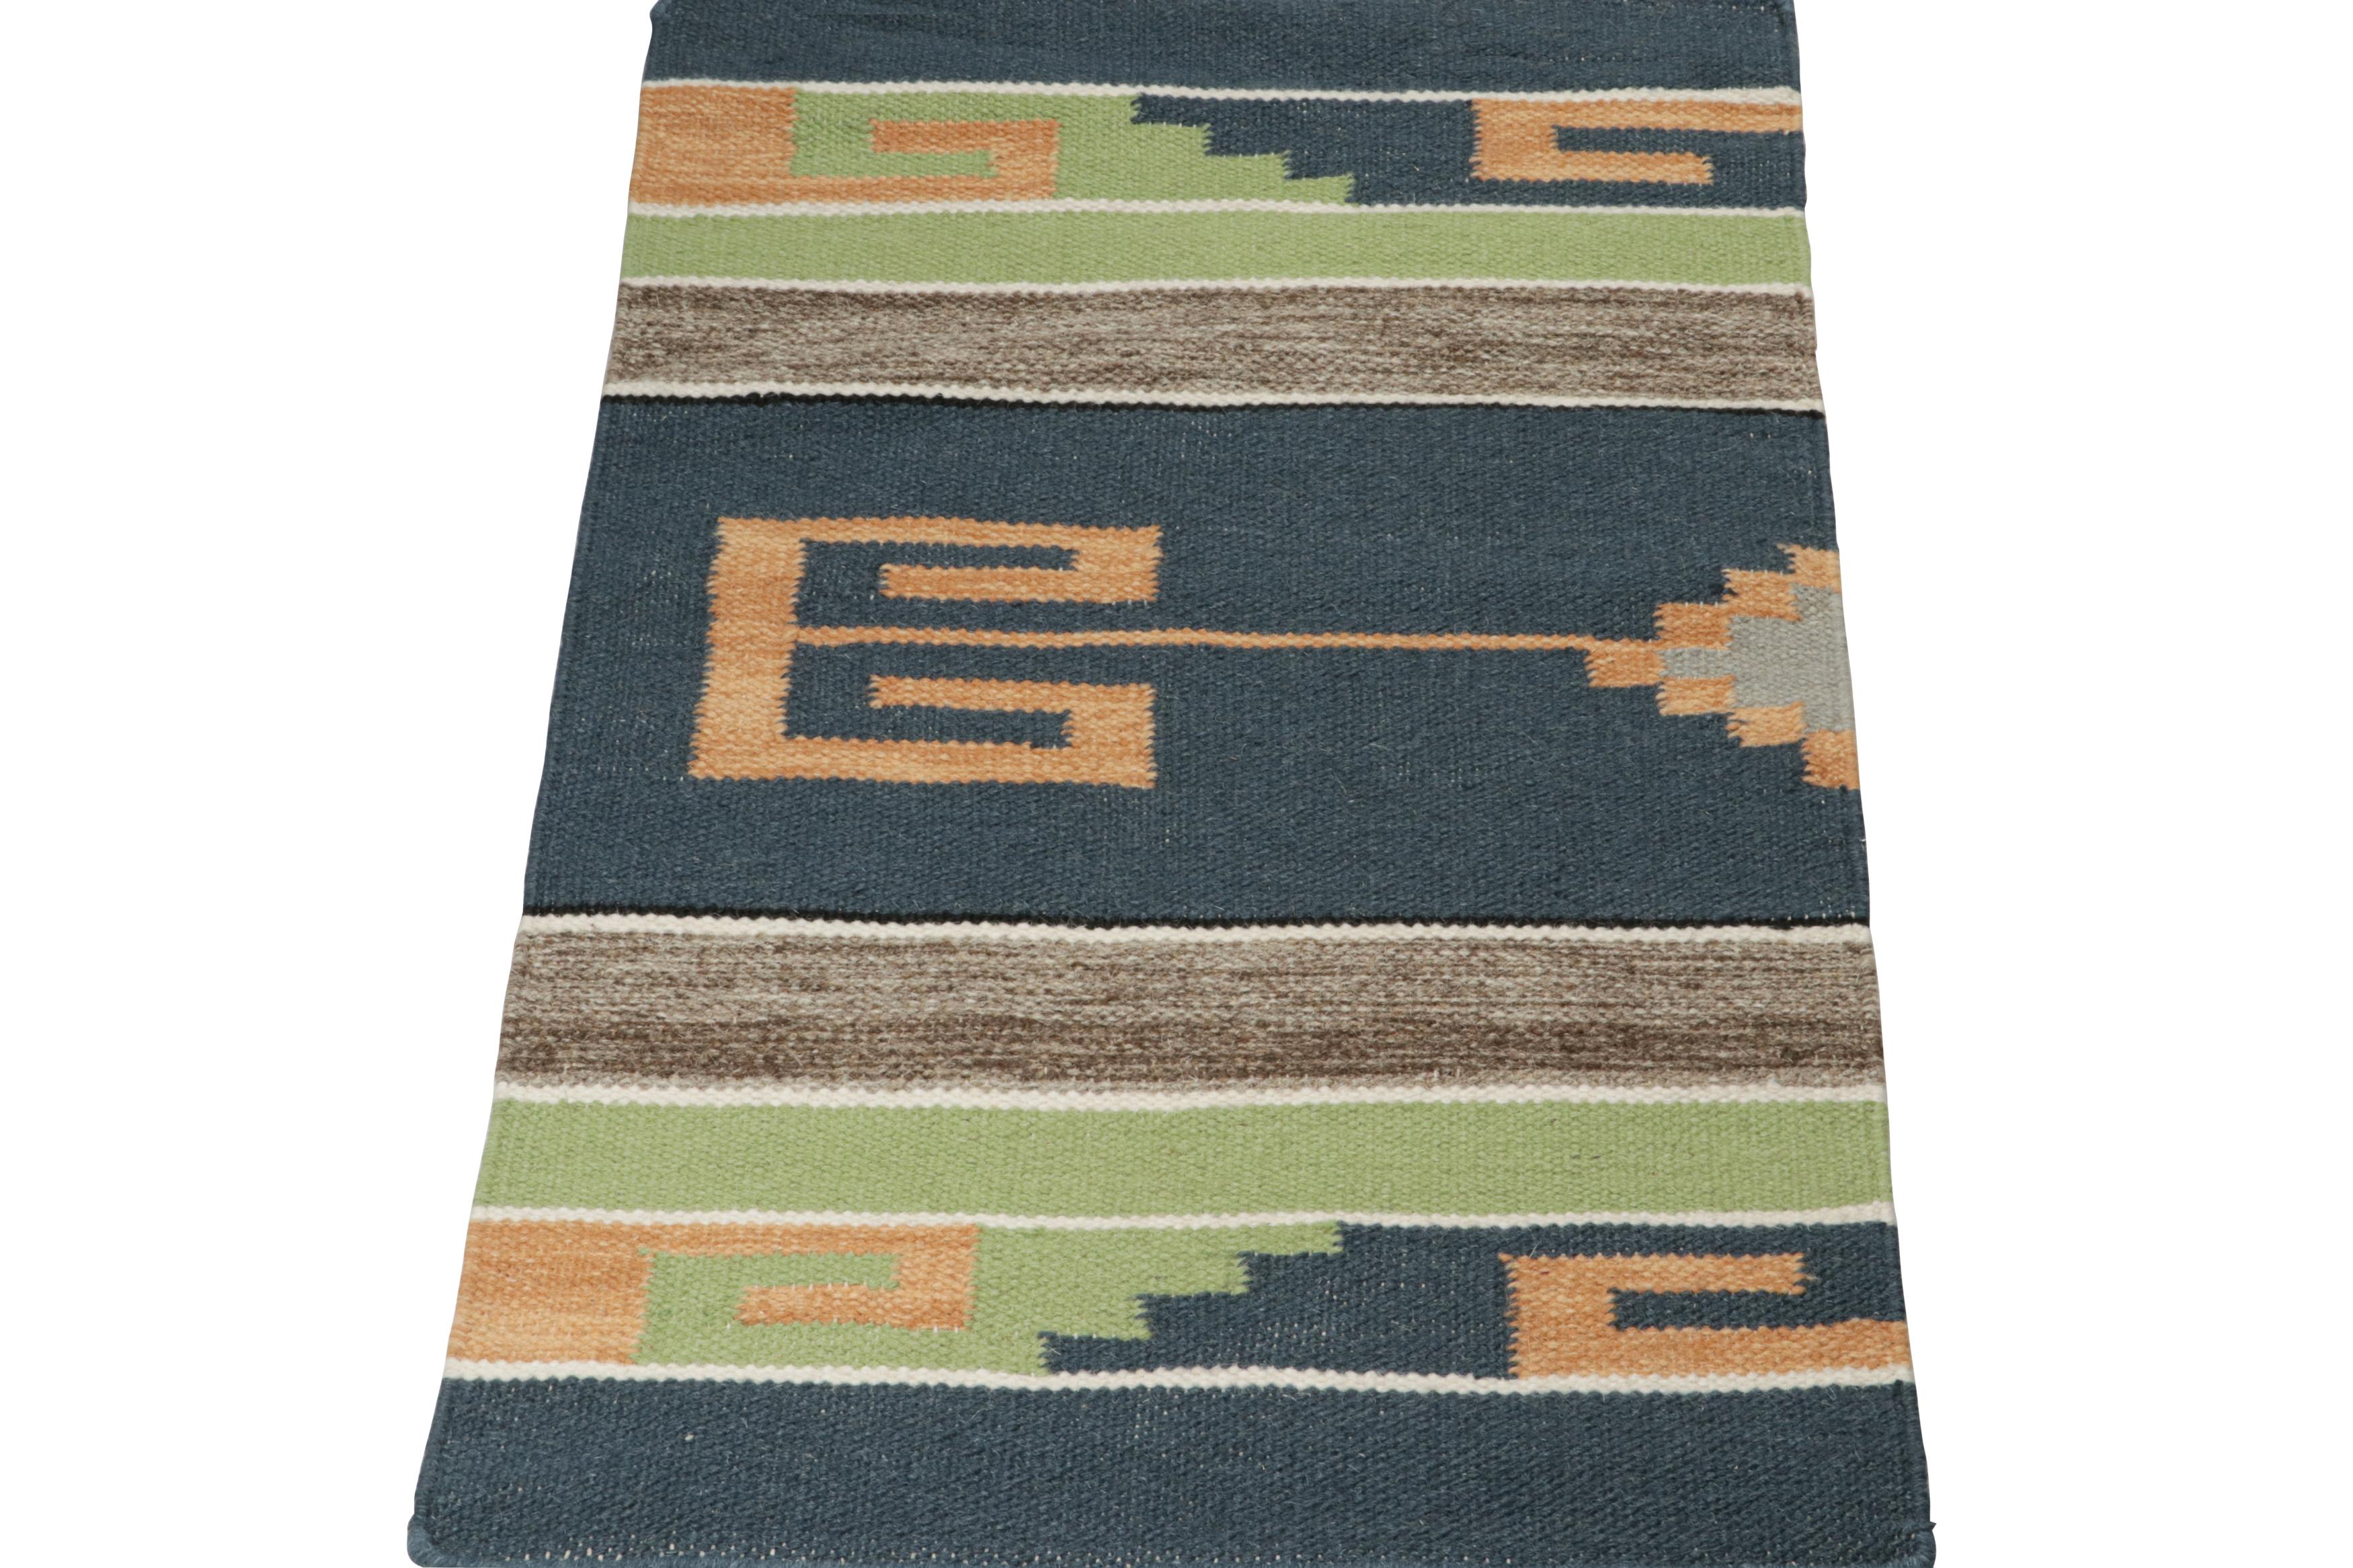 Modern Rug & Kilim’s Tribal style Kilim in Blue, Gold, Green Patterns For Sale